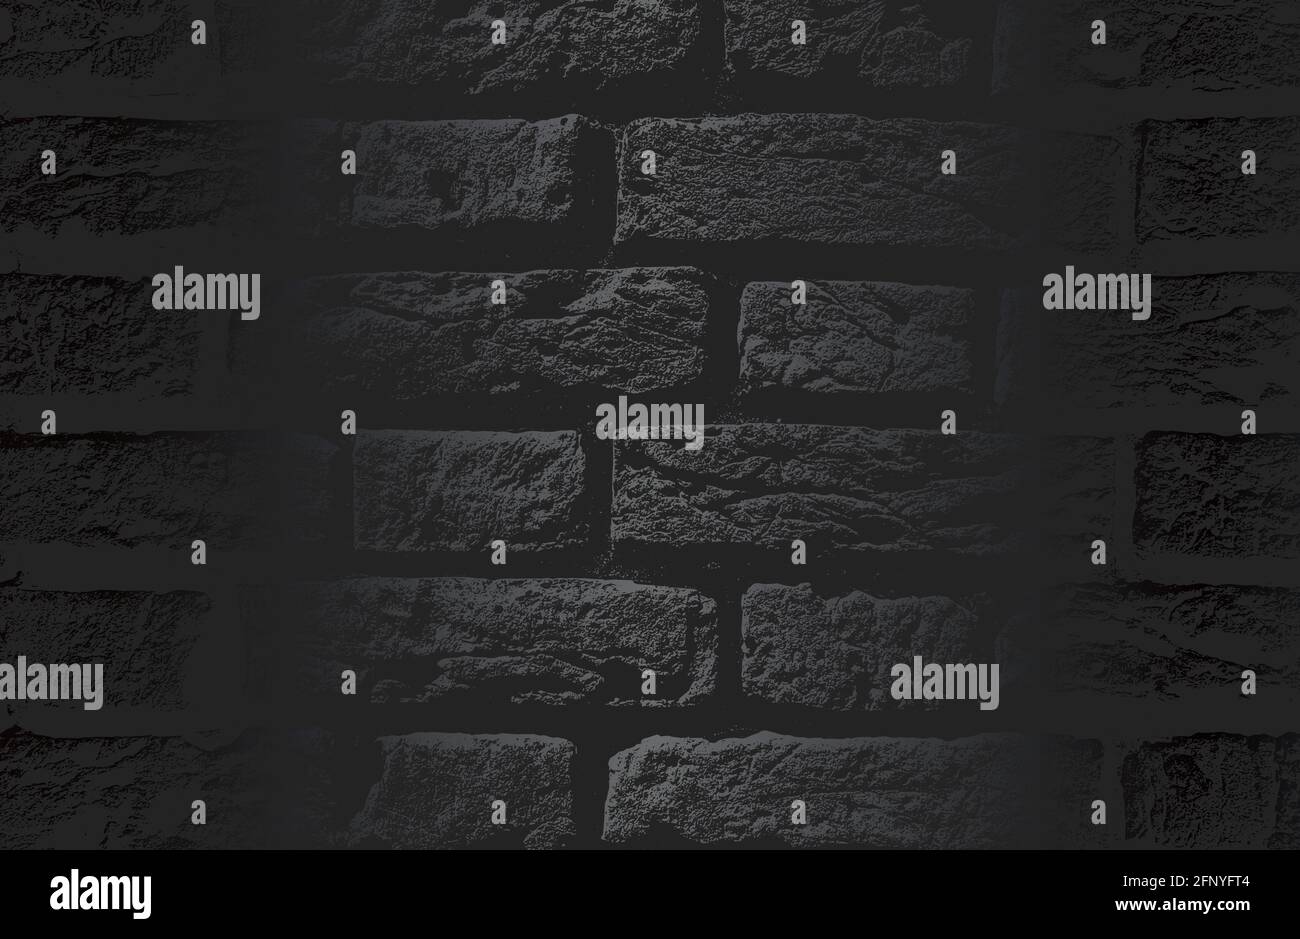 Luxury black metal gradient background with distressed brick wall texture. Vector illustration Stock Vector